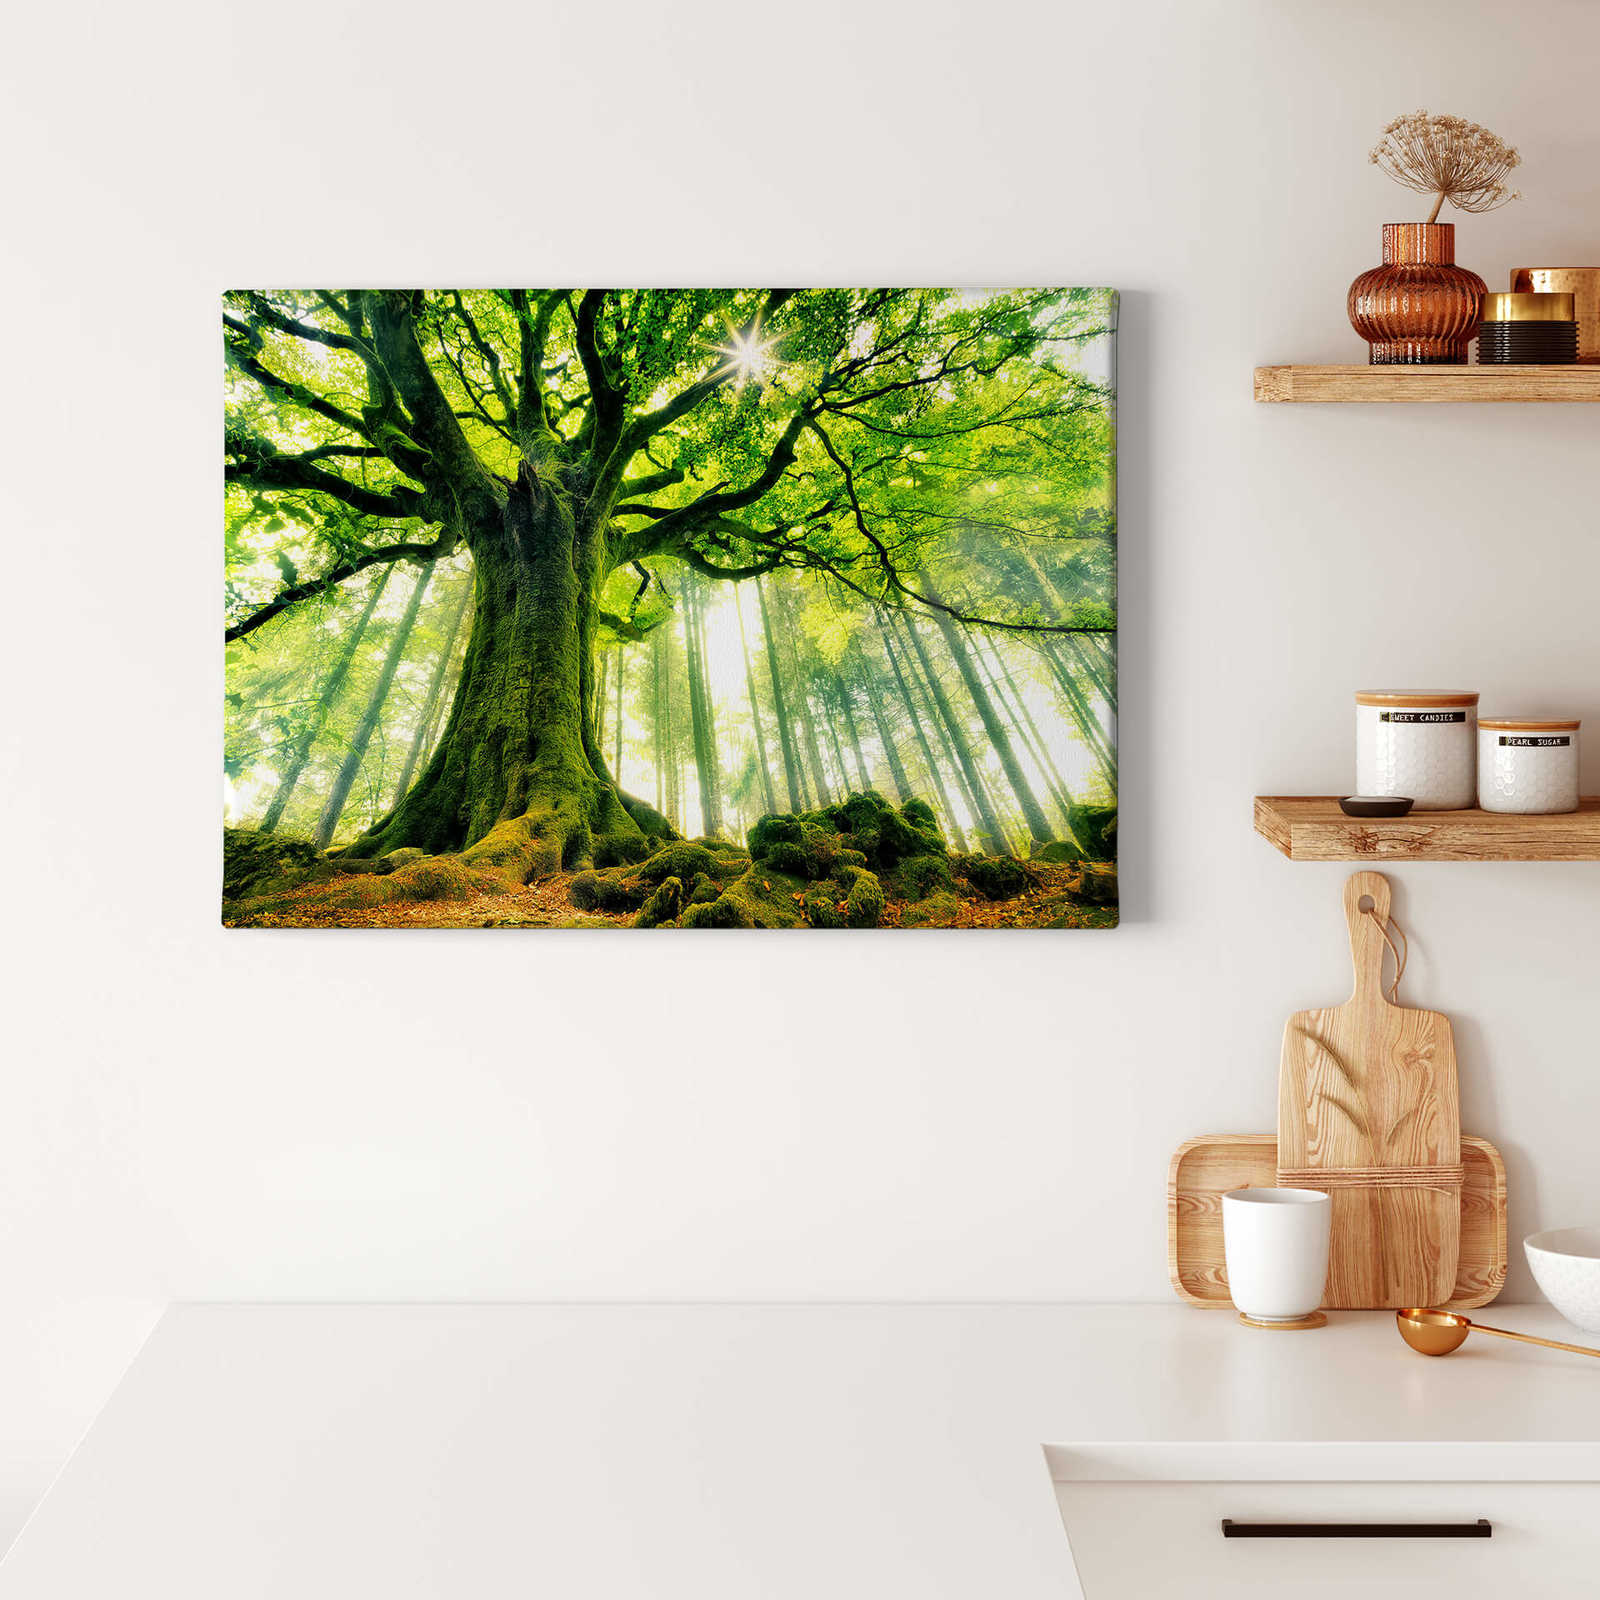             Canvas print leafy forest with fairy tale atmosphere
        